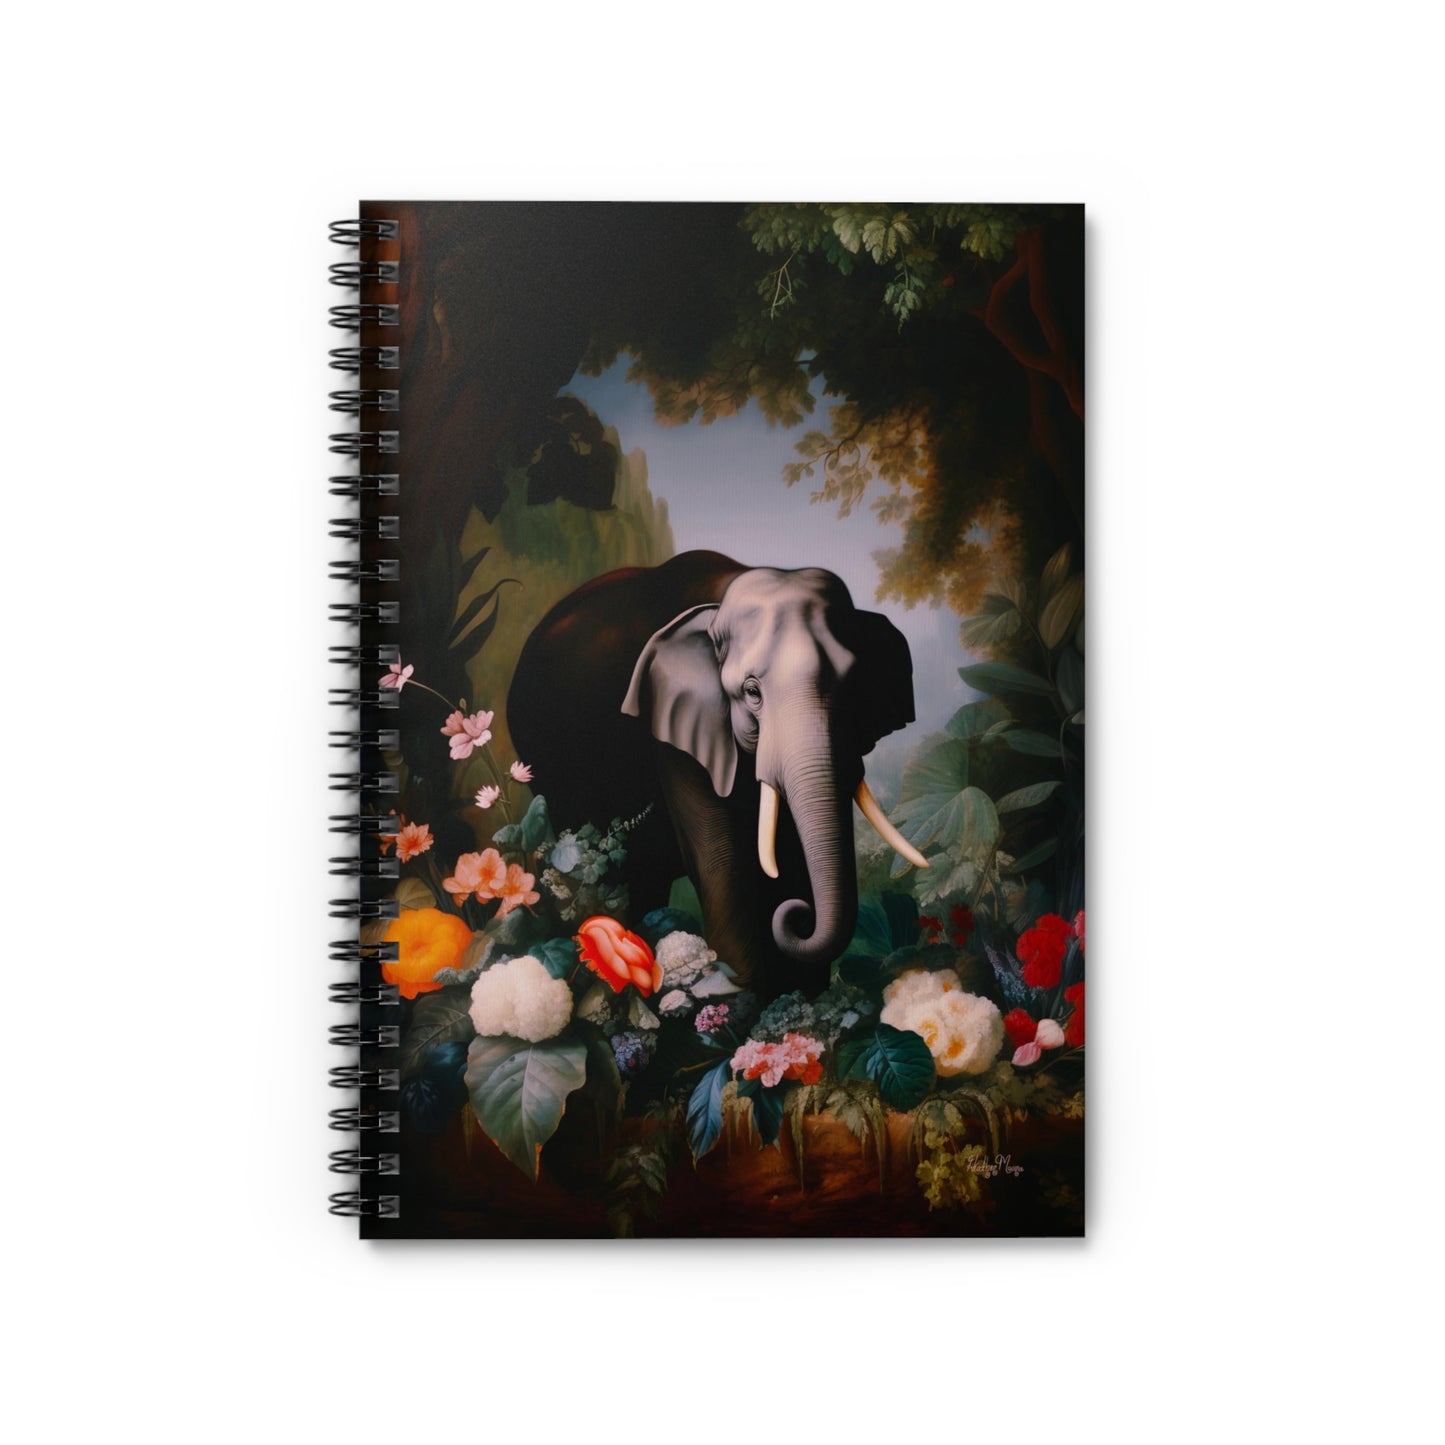 Majestic Elephant in a Lush Jungle | Ruled Line Spiral Notebook